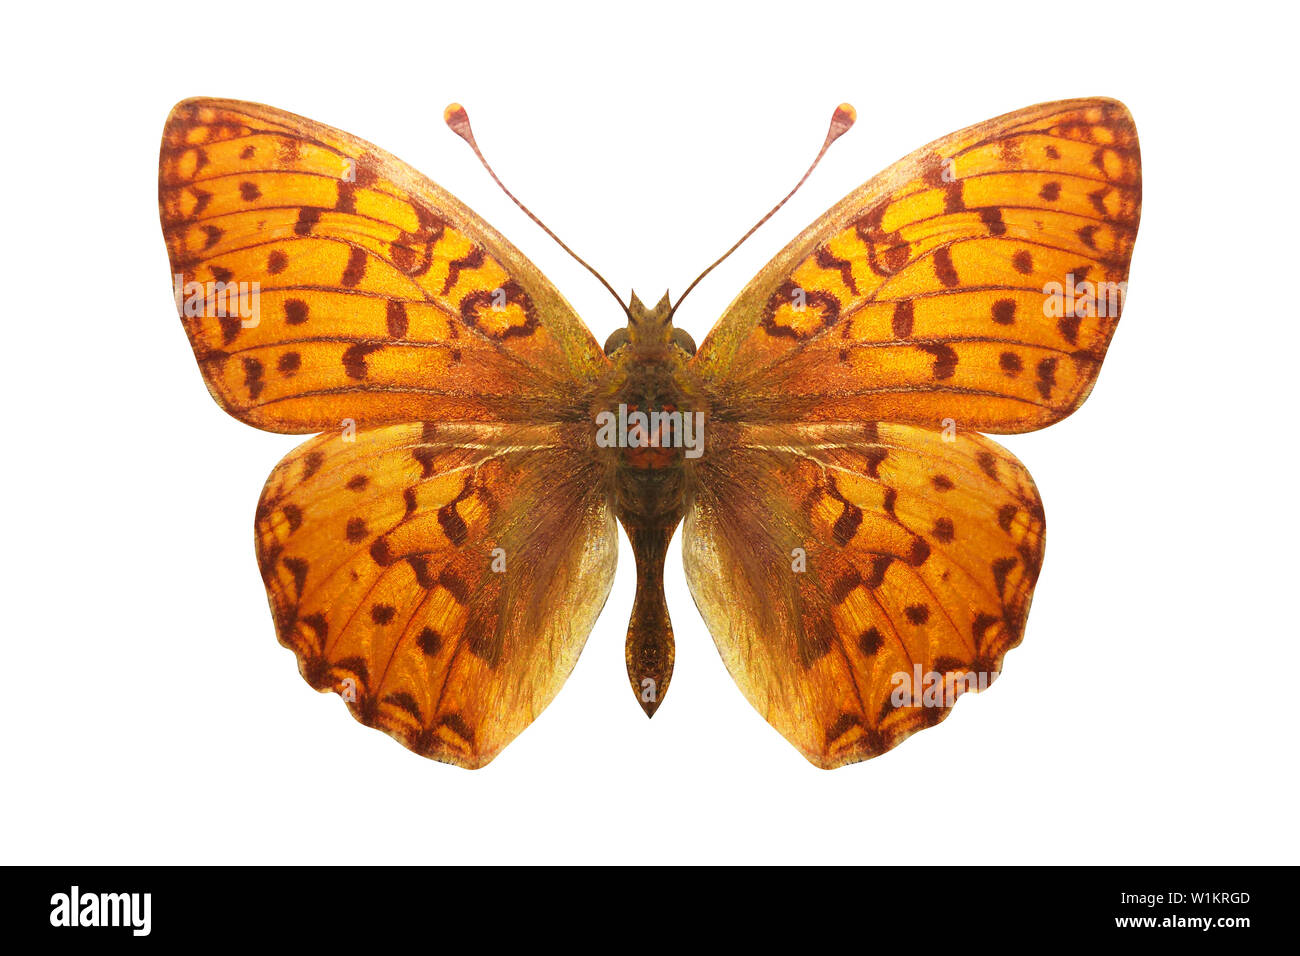 orange butterfly with leopard spots. breed Argynnis aglaja. isolated on white background Stock Photo